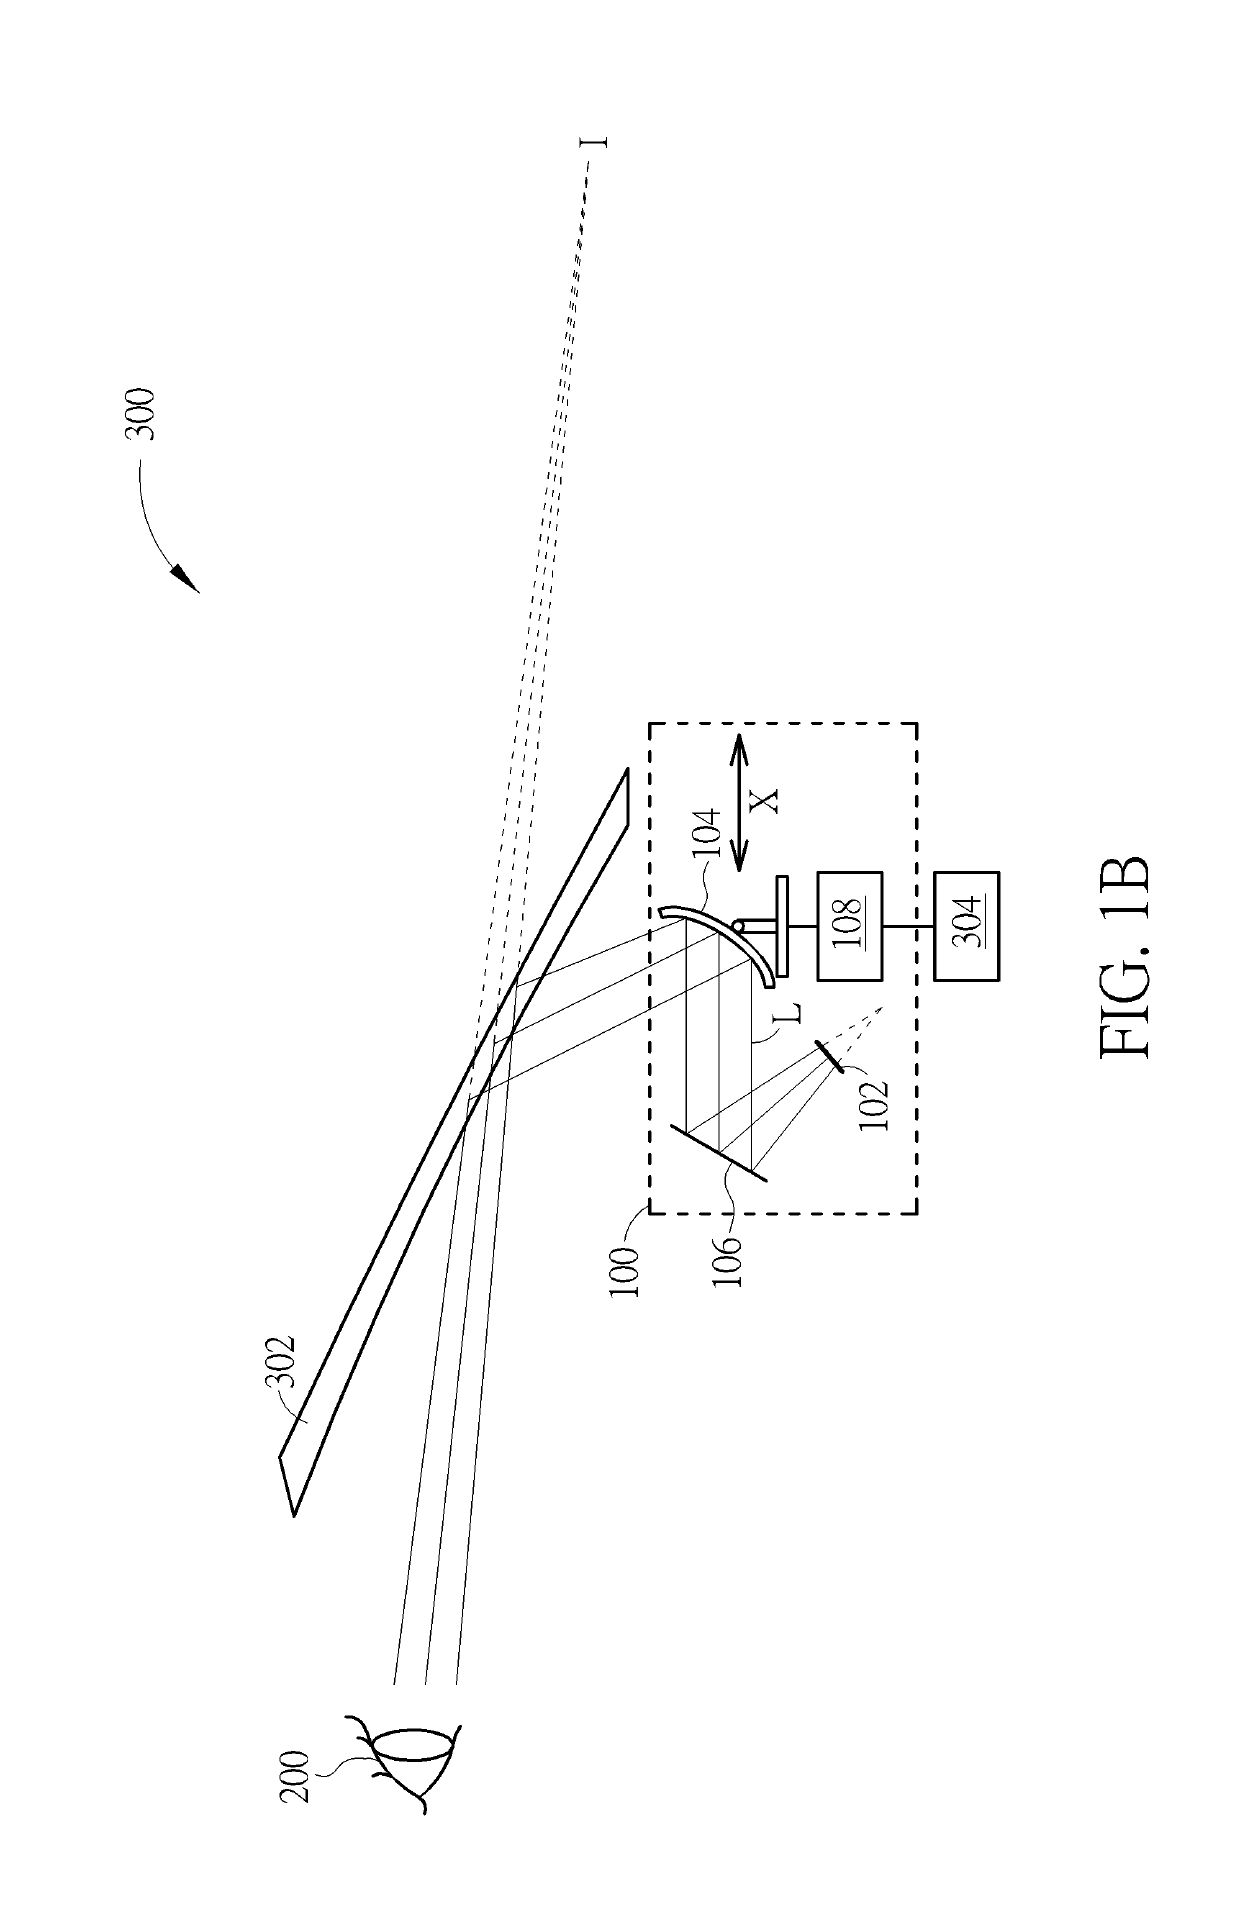 Vehicle equipped with head-up display system capable of adjusting imaging distance and maintaining image parameters, and operation method of head-up display system thereof